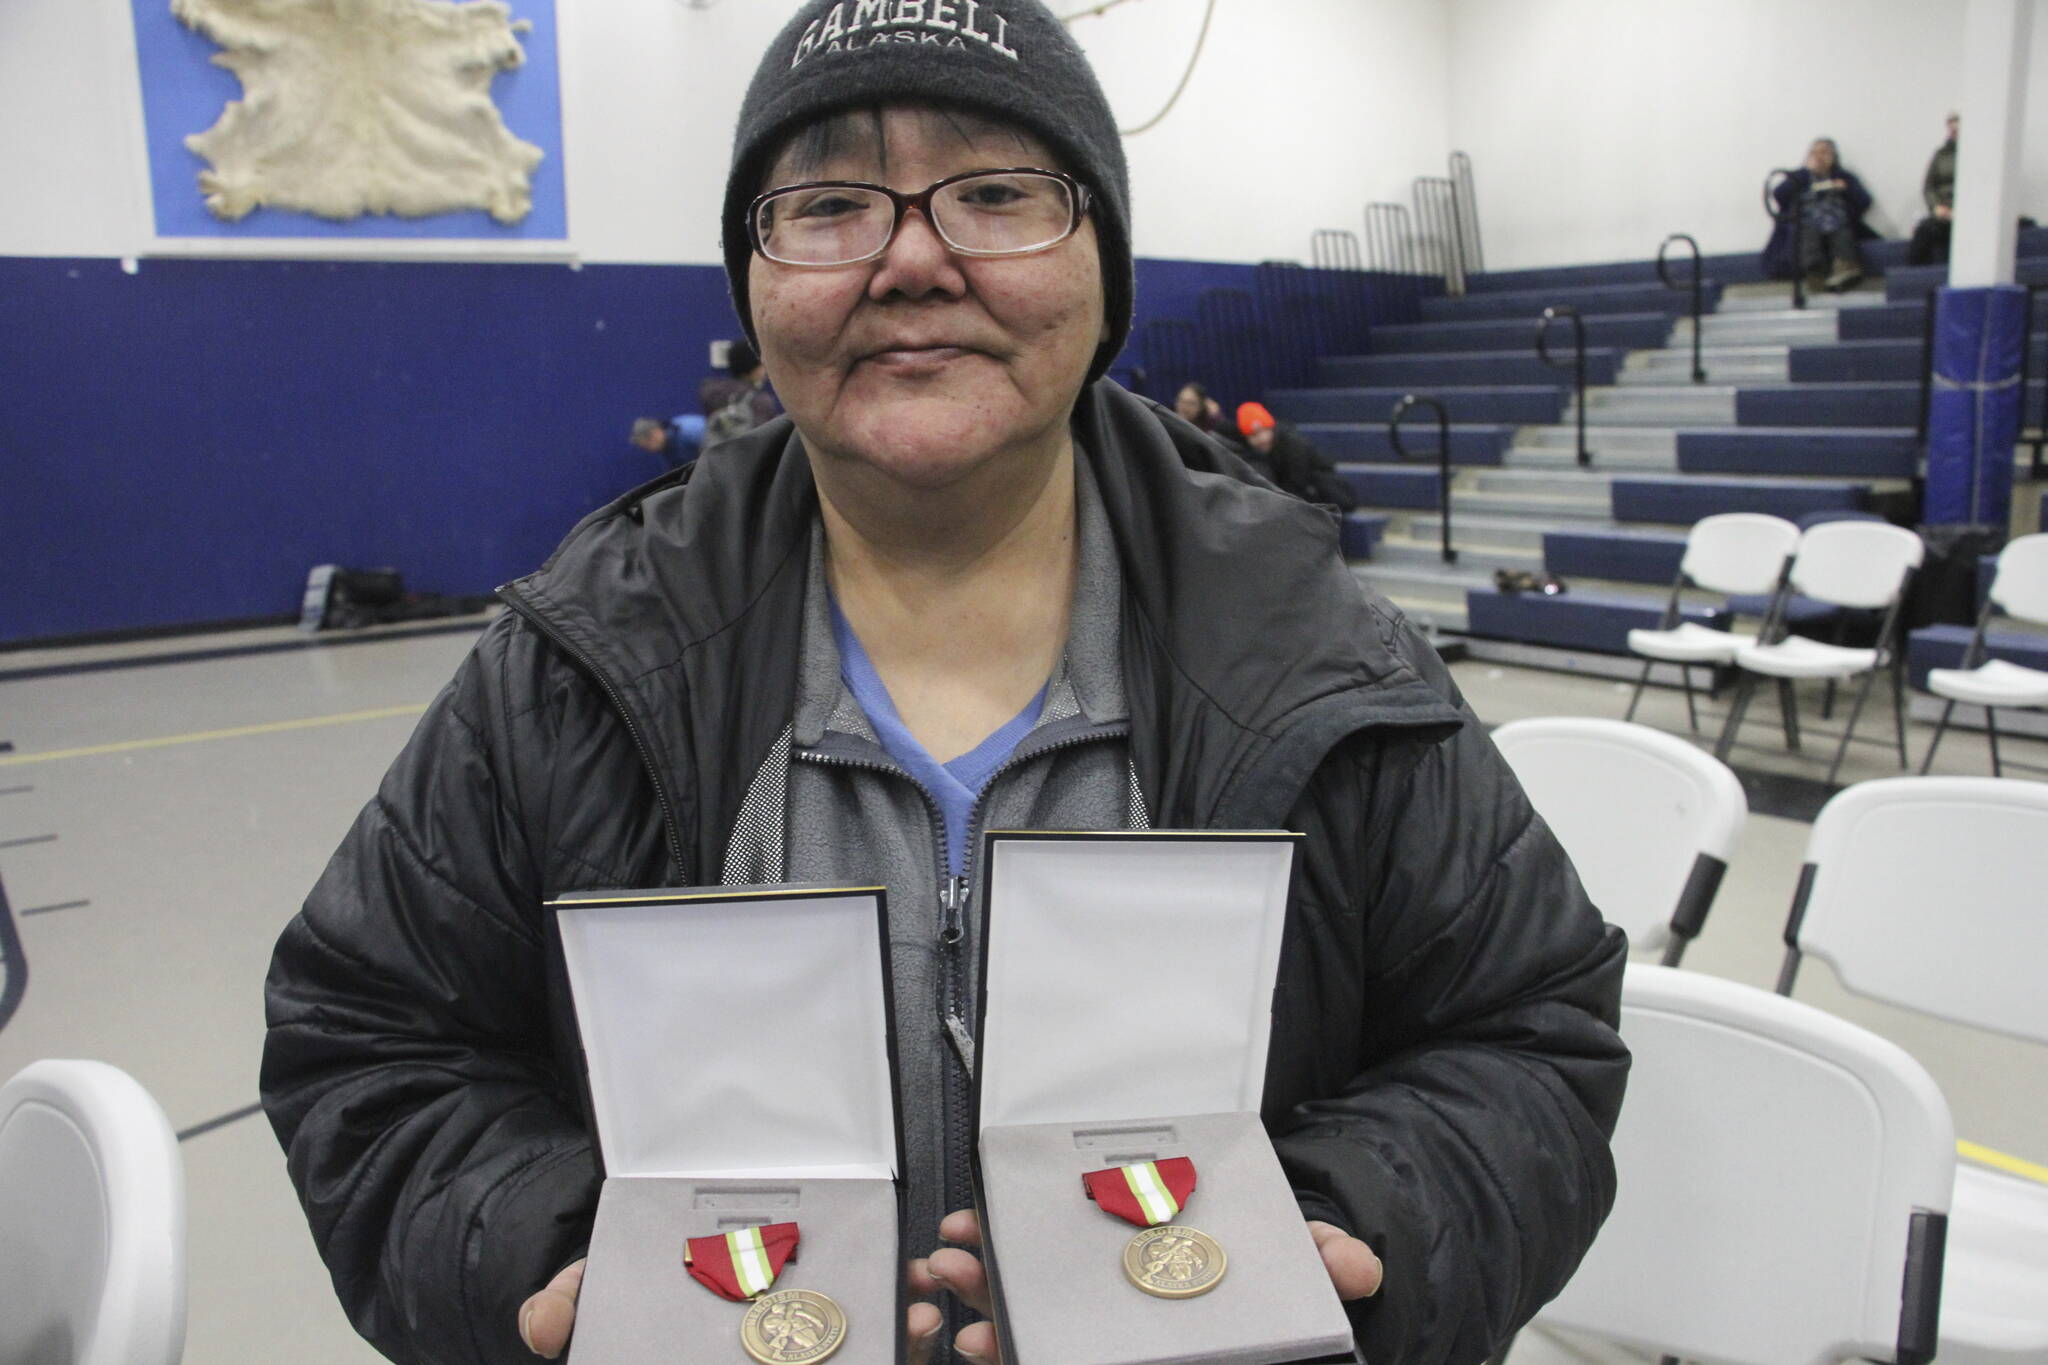 This March 28, 2023, photo shows JoAnn Kulukhon posing with two Alaska Heroism Medals presented posthumously to her uncles, Pvts. Luke and Leroy Kulukhon, during a ceremony in Gambell, Alaska. Sixteen Alaska National Guard members were honored for helping rescue the 11 crewmembers of a Navy plane that was shot down in 1955 by Soviet jet fighters and crash-landed about 8 miles from Gambell, on St. Lawrence Island, and 15 medals were presented posthumously. (AP Photo/Mark Thiessen)